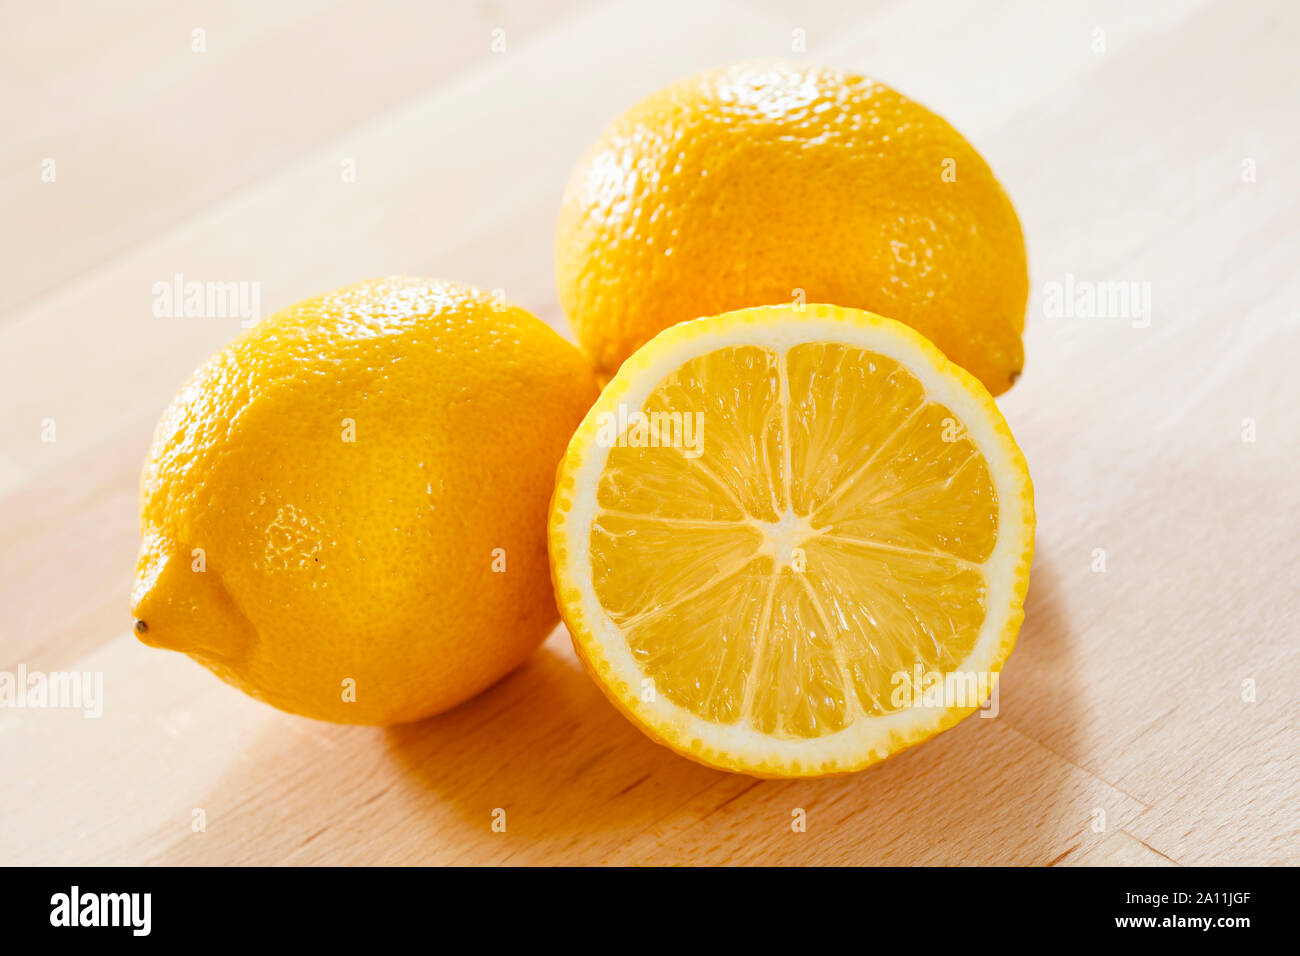 Lemons on a wooden surface, whole and half Stock Photo